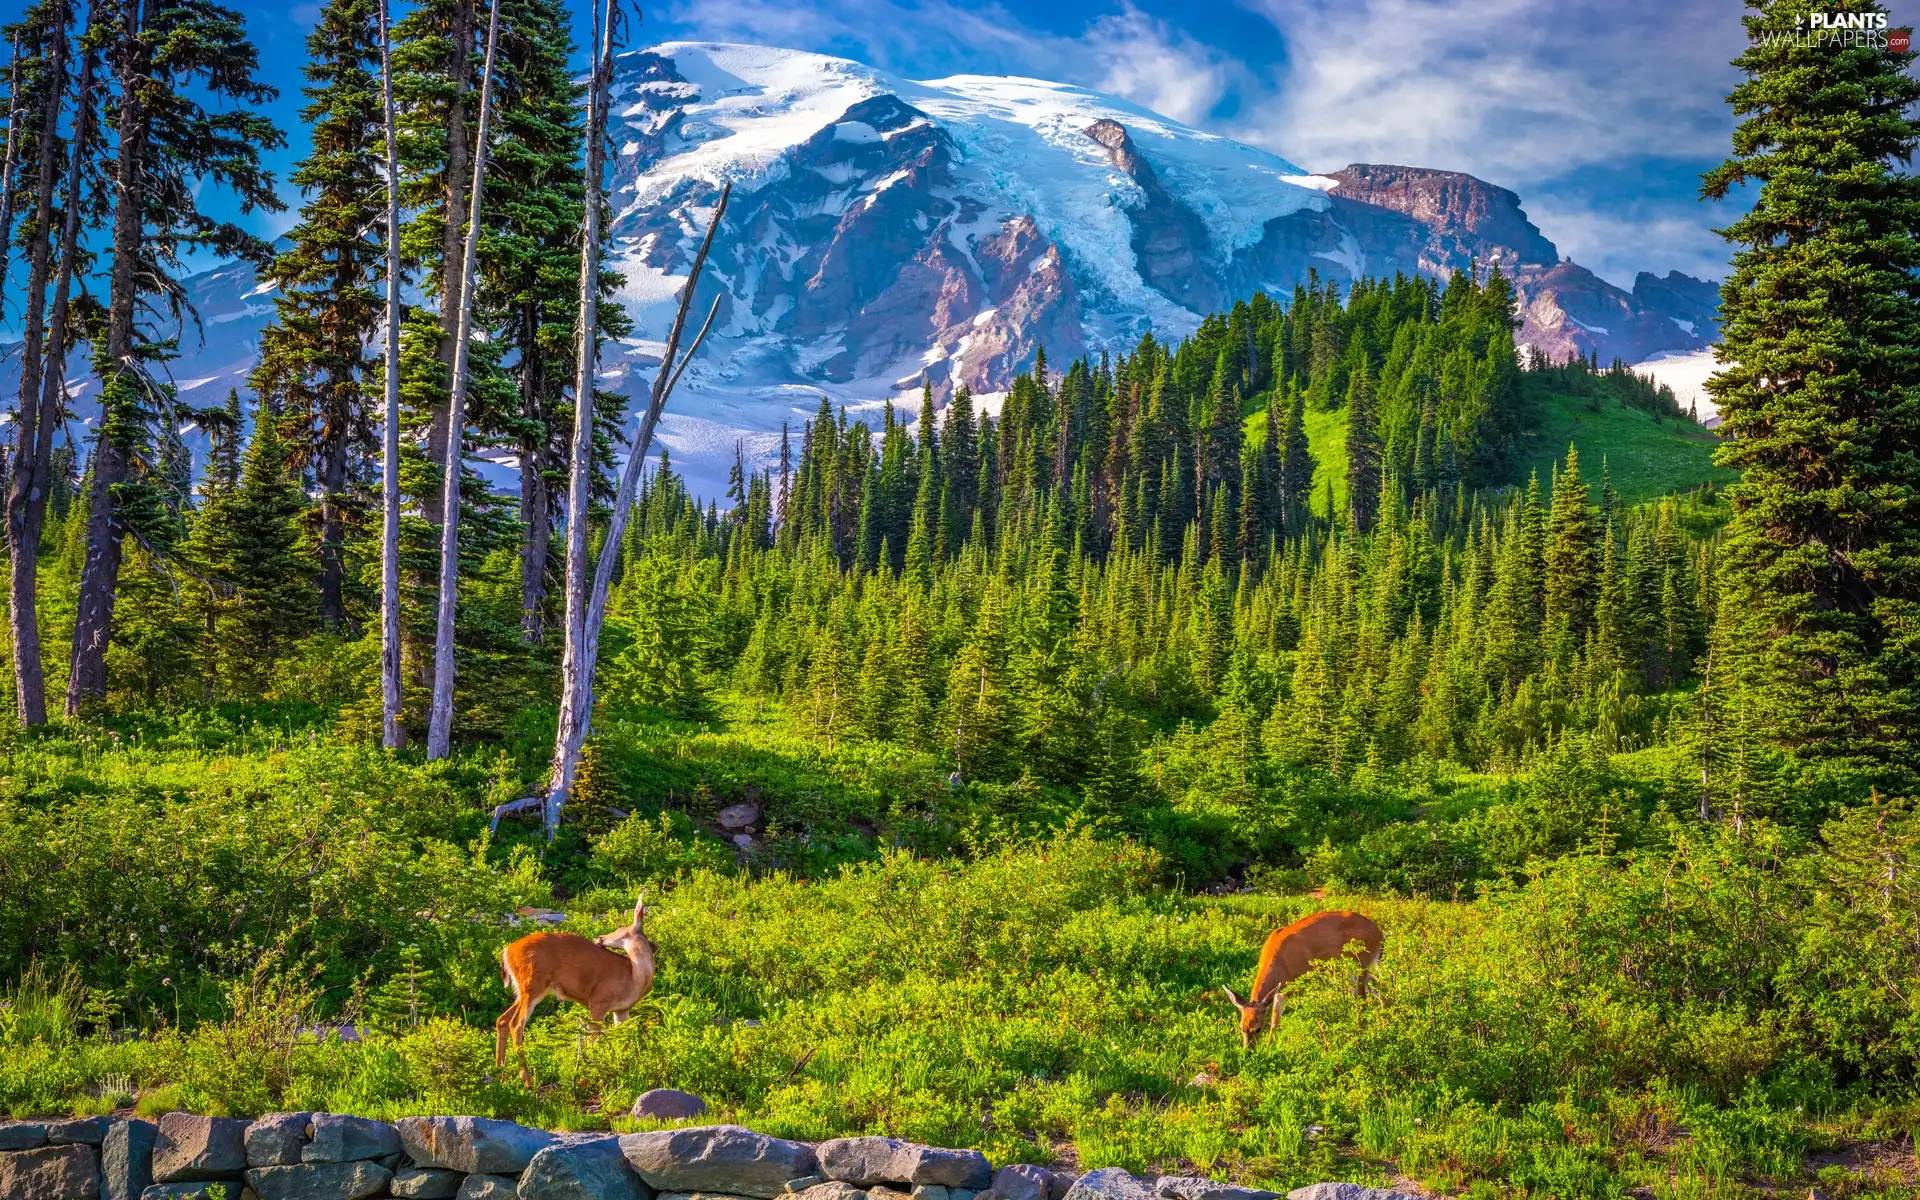 Mountains, Mount Rainier National Park, Stratovolcano Mount Rainier, trees, Washington State, The United States, deer, clouds, viewes